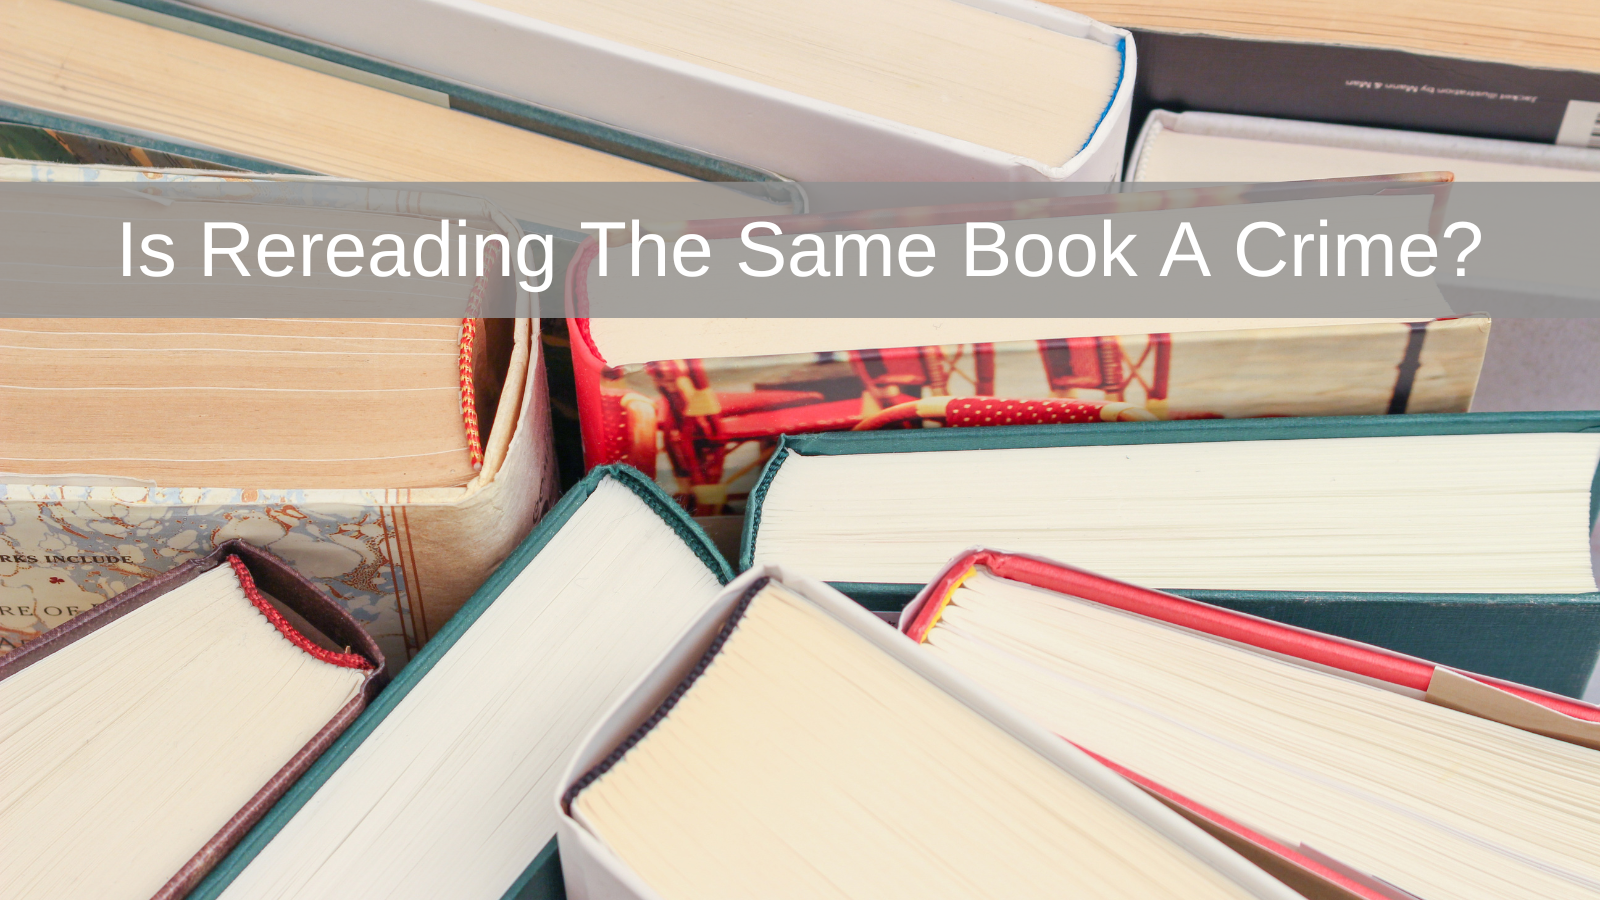 Is Rereading the Same Book a Crime?